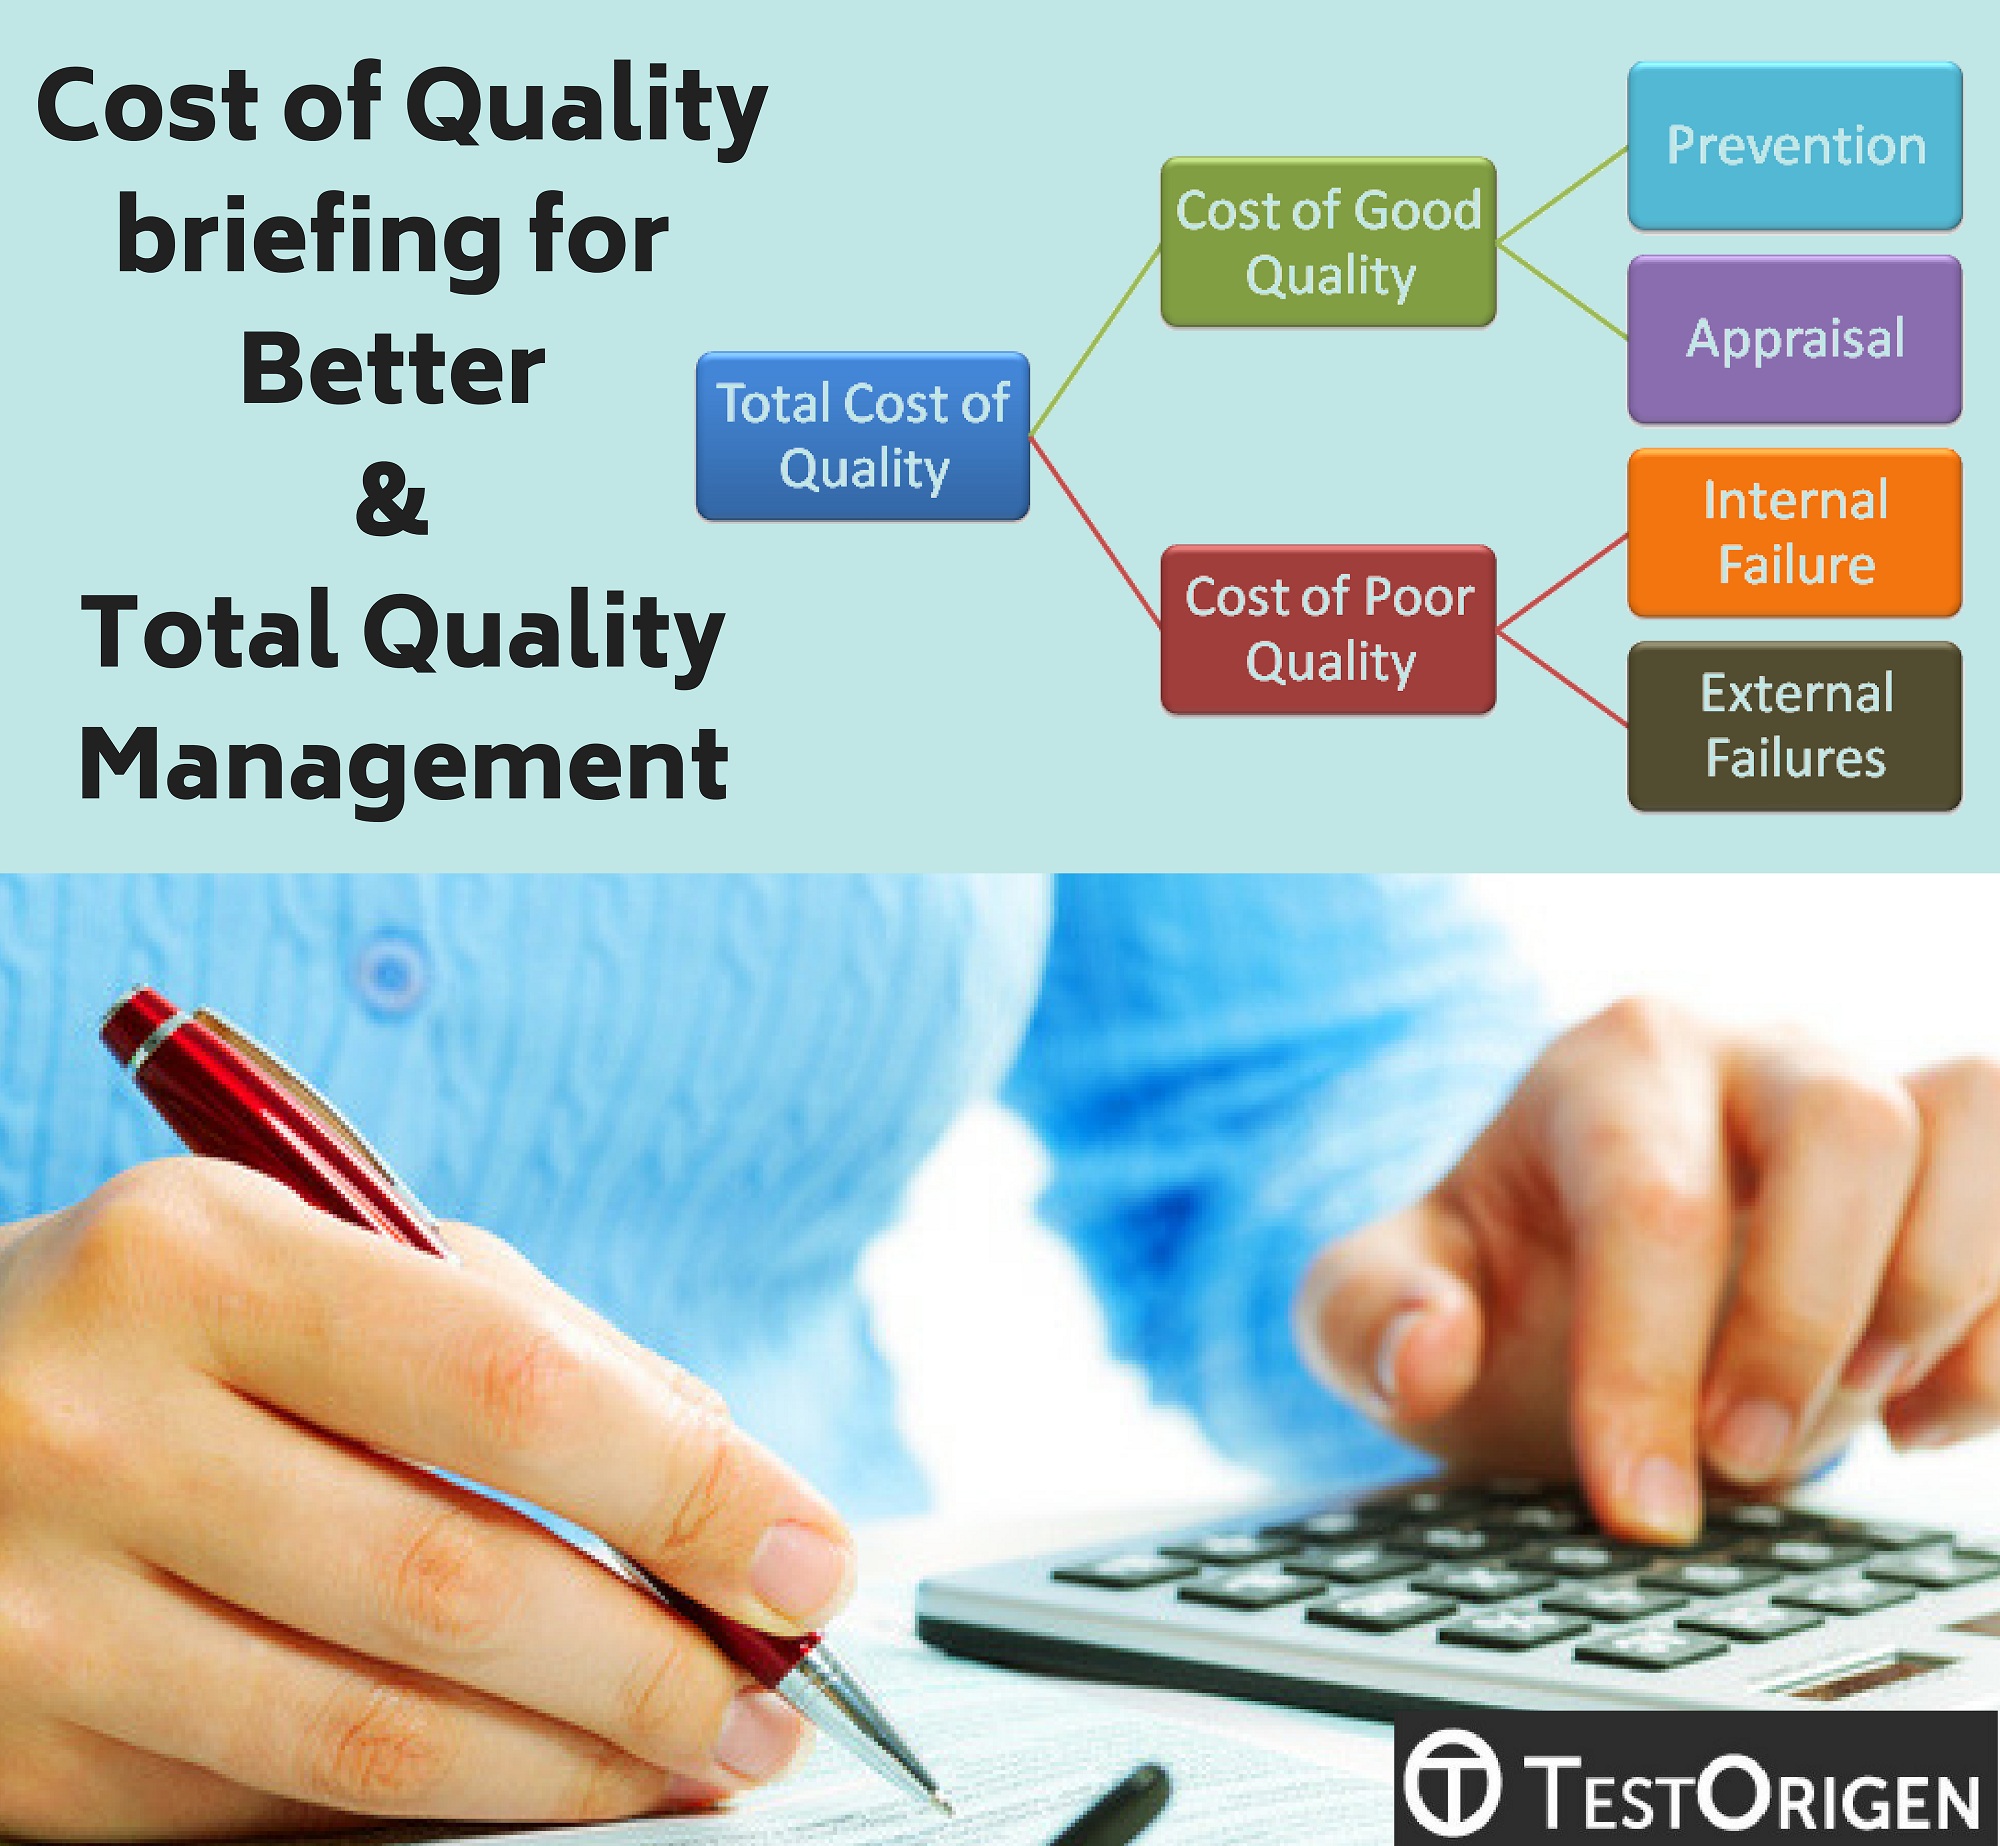 Cost of Quality briefing for Better & Total Quality Management